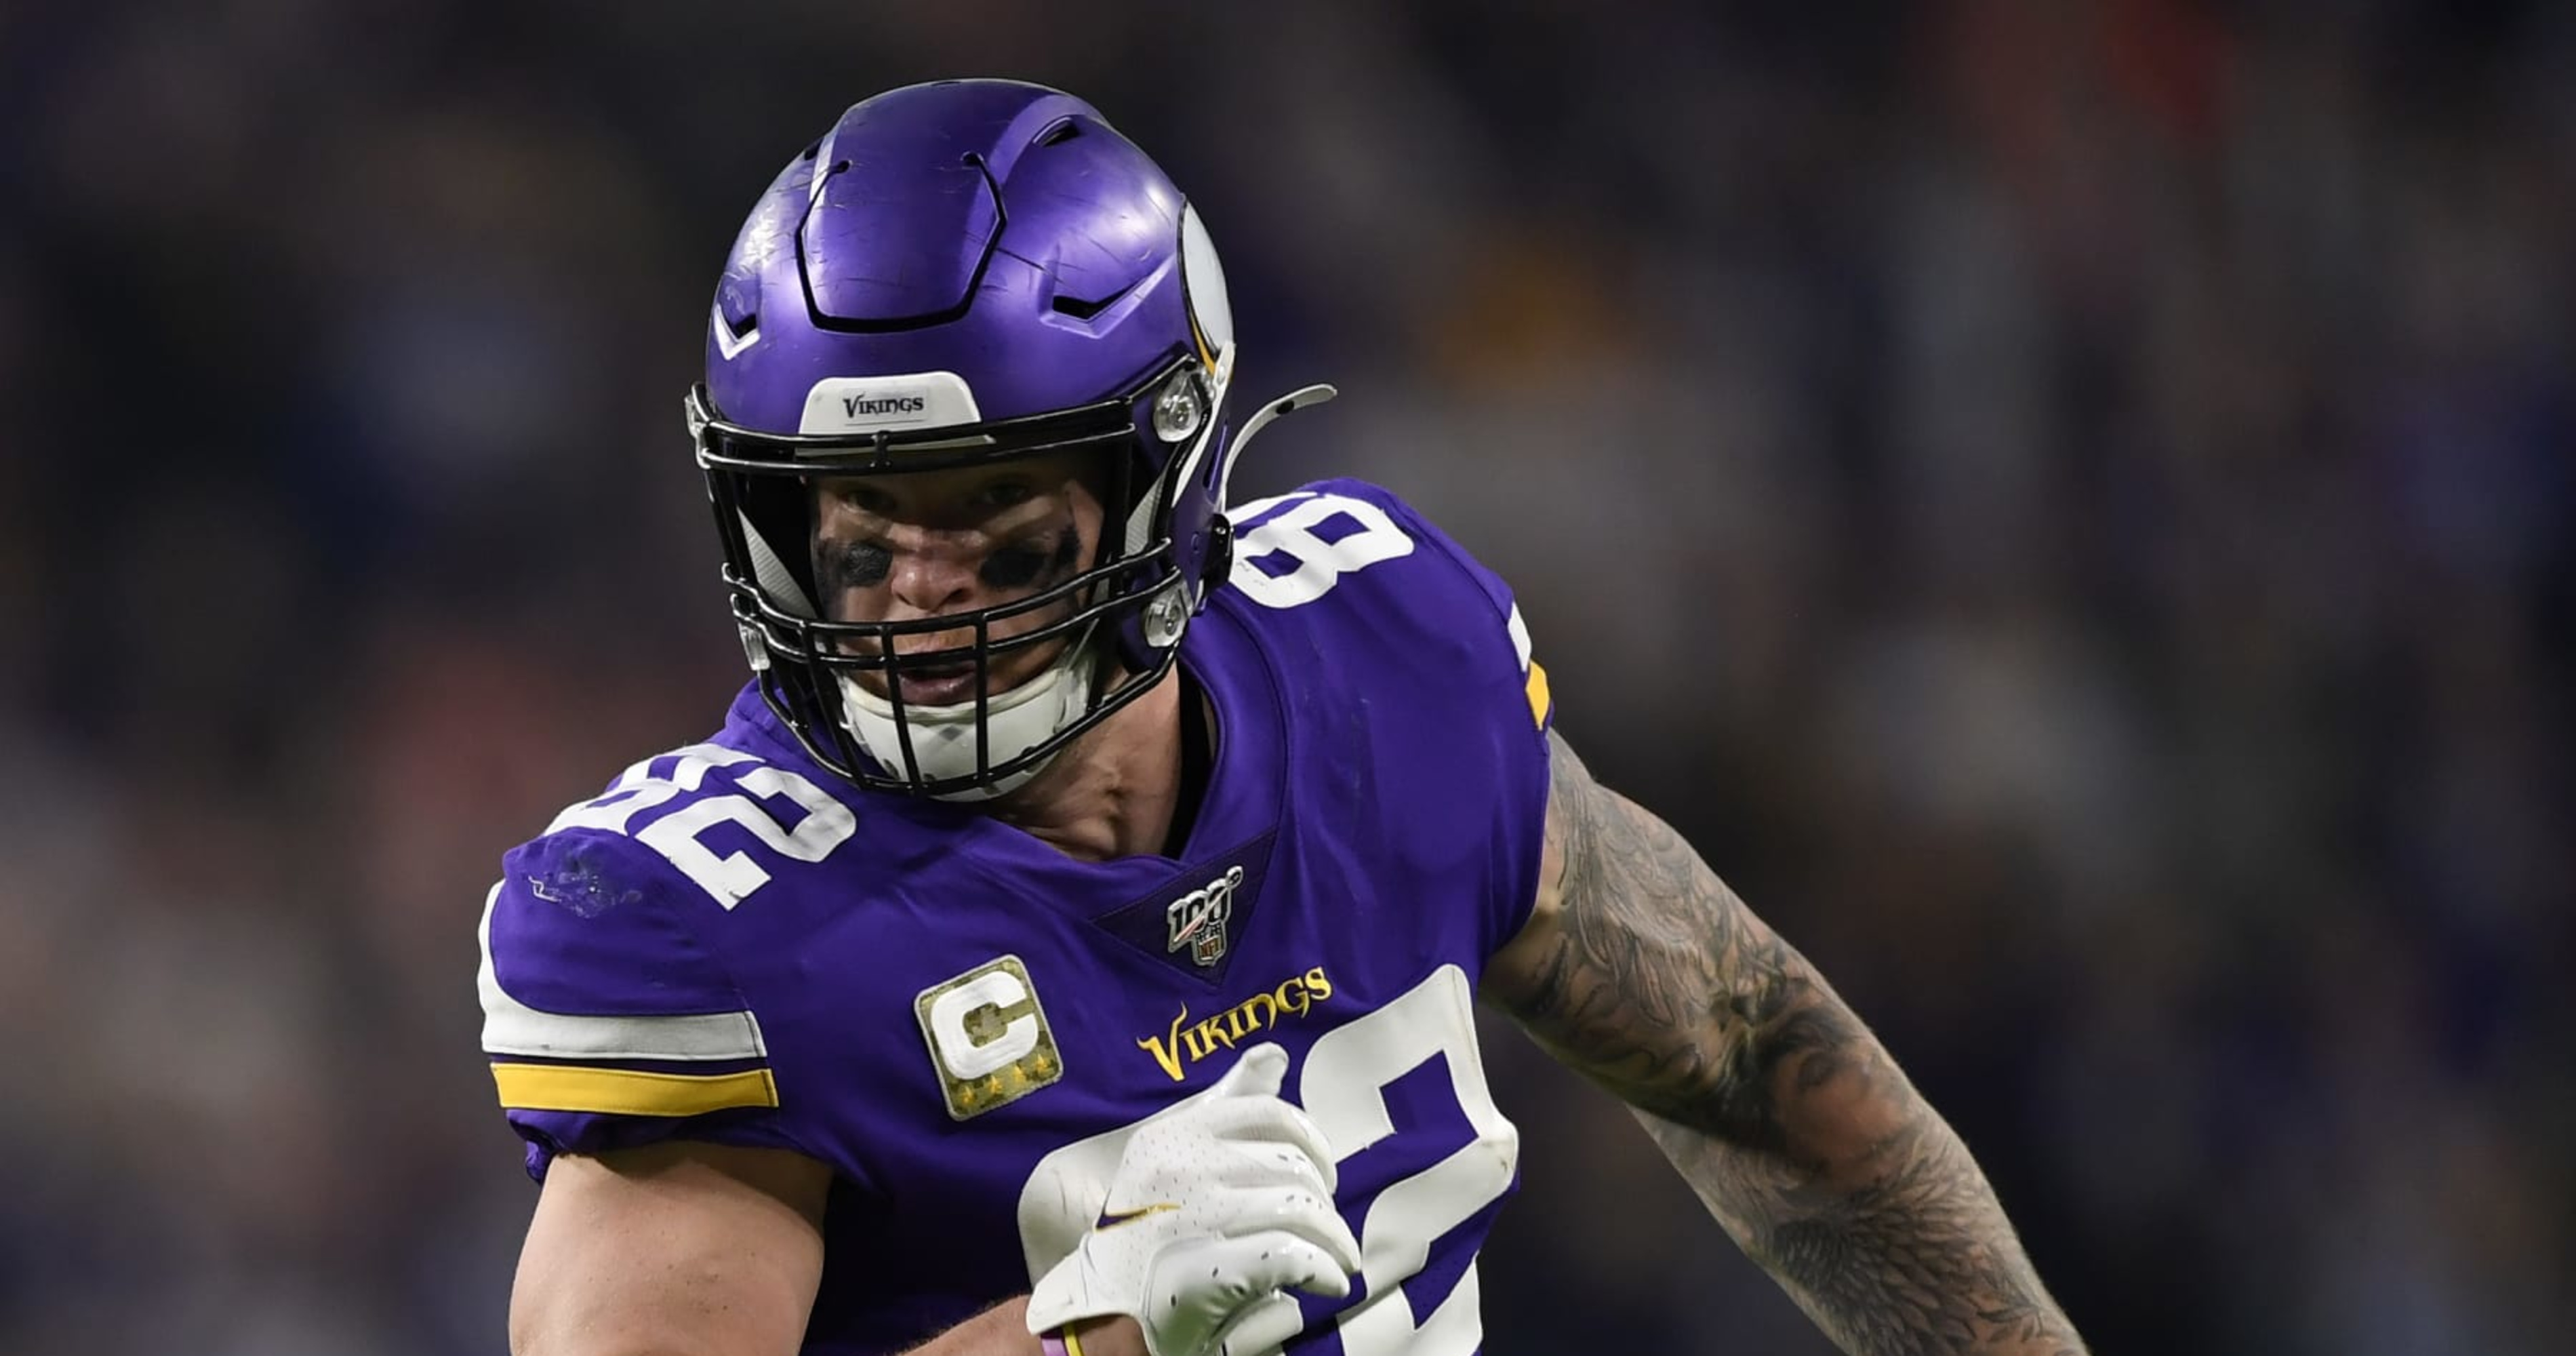 Kyle Rudolph Retires from NFL After 12 Seasons; Vikings Will Honor